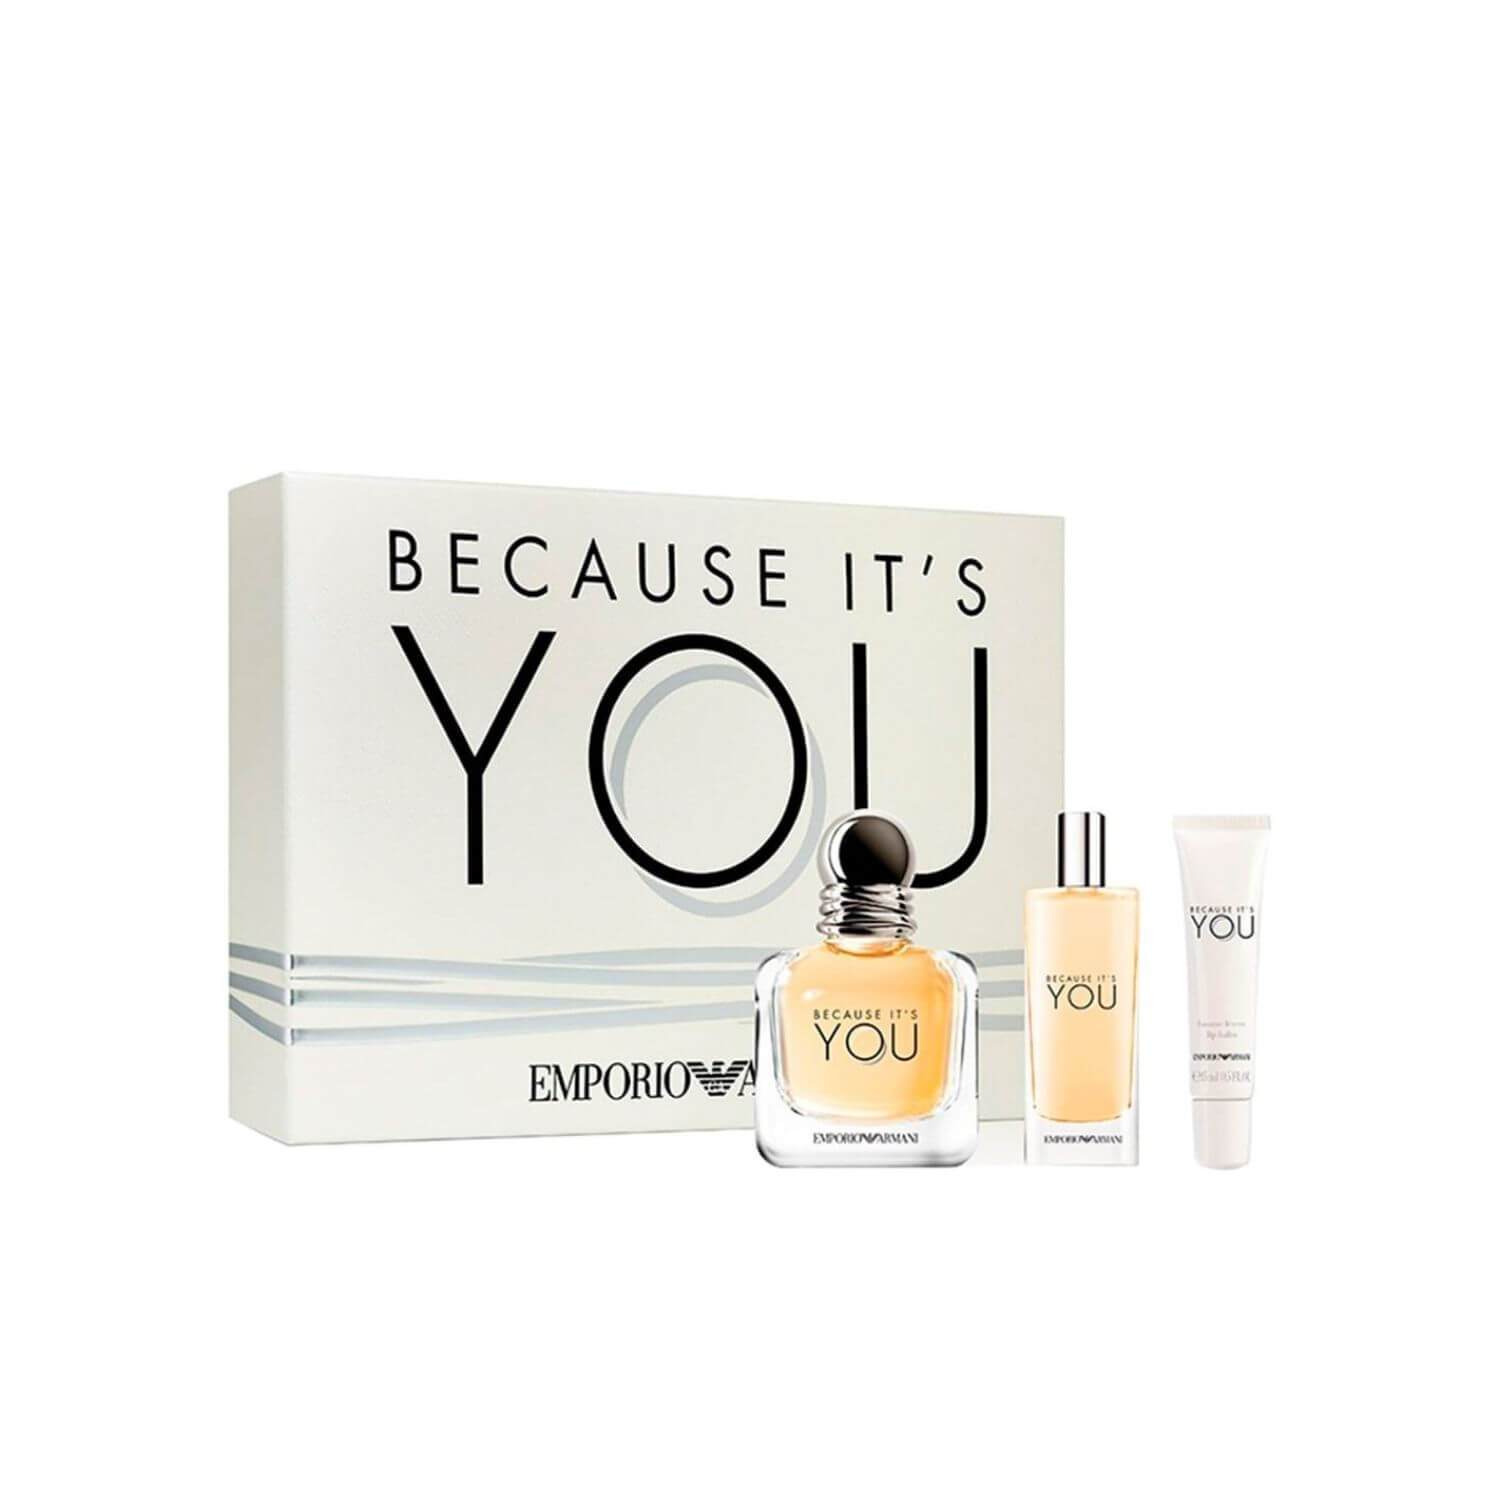 Armani Emporio Armani Because It's You - EDP 100 ml + EDP 15 ml + body lotion 75 ml, Giorgio Armani Emporio Armani Because It´s You for women was launched in 2017 The head consists of raspberries, oil from the flowers of hot orange (neroli) and lemon The heart is made of rose, the composition is basically closed with vanilla, musk and amberwood